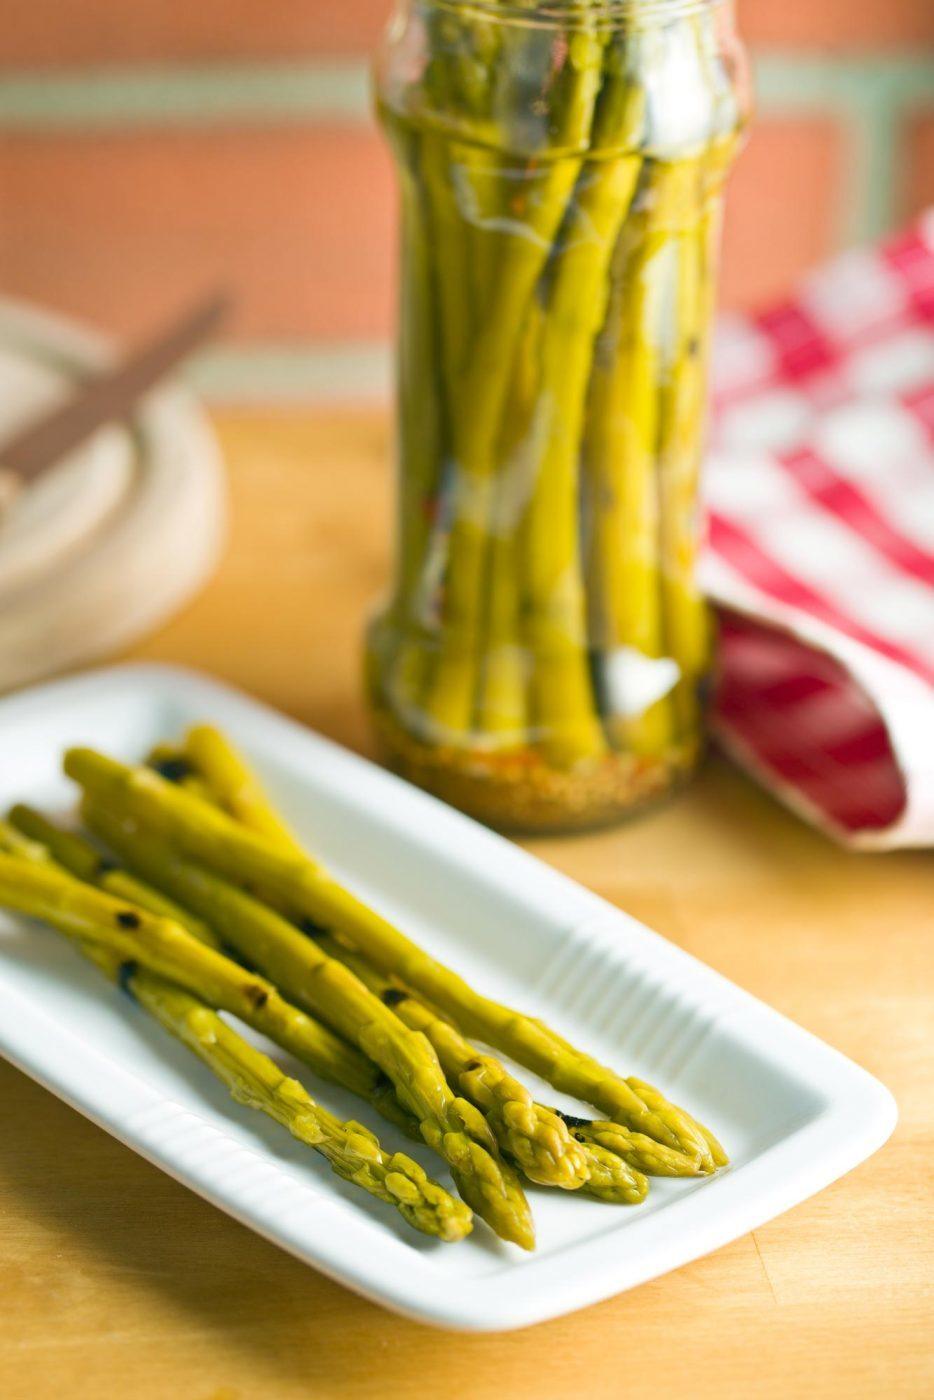 Pickled asparagus recipe- easy canning instructions